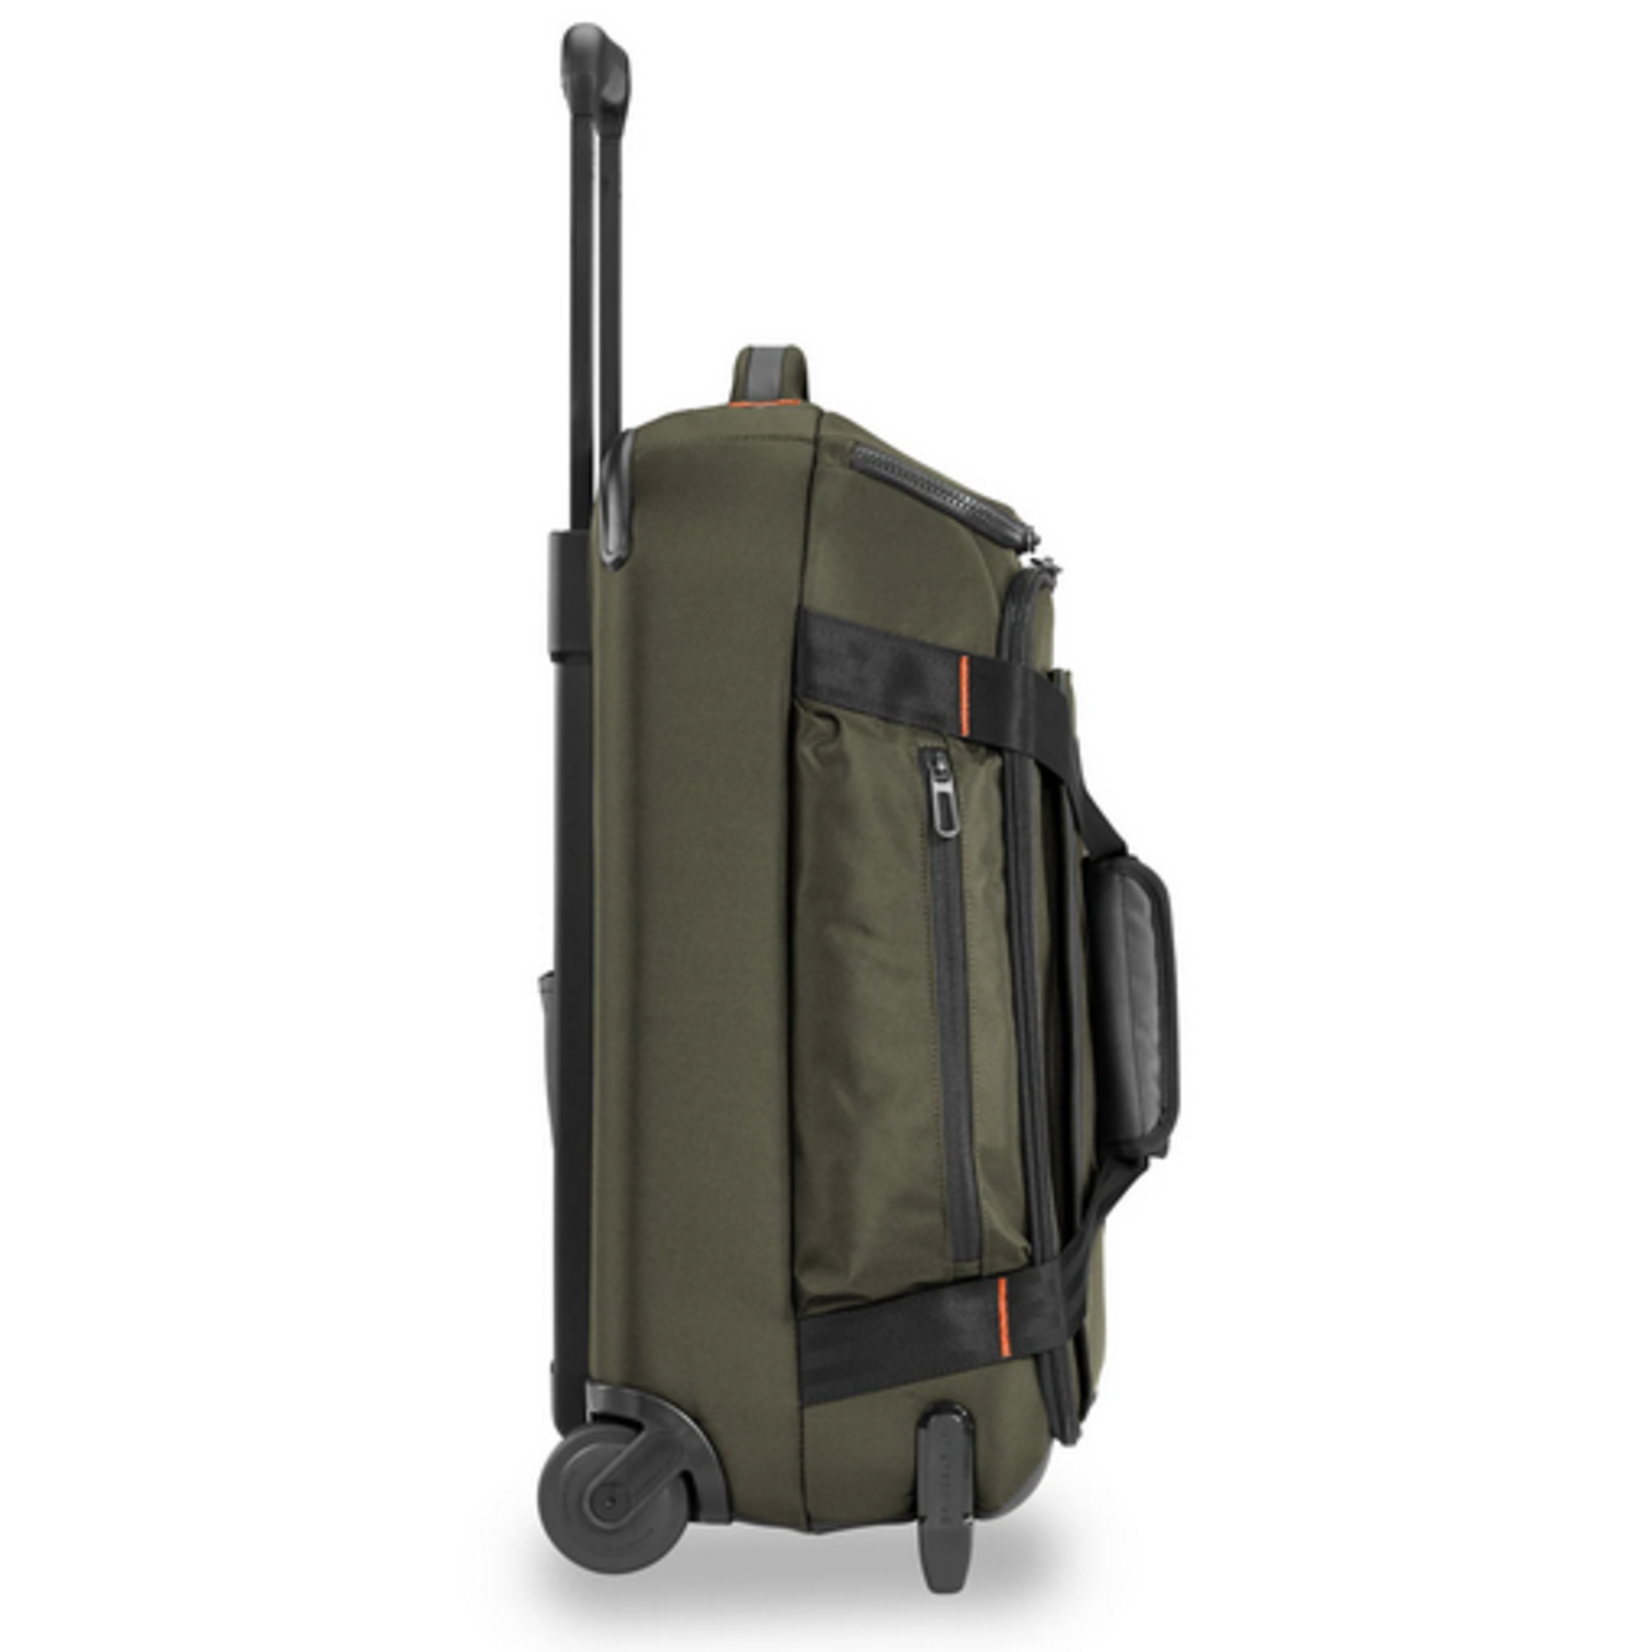 BRIGGS & RILEY ZDX 21" CARRY-ON UPRIGHT DUFFLE